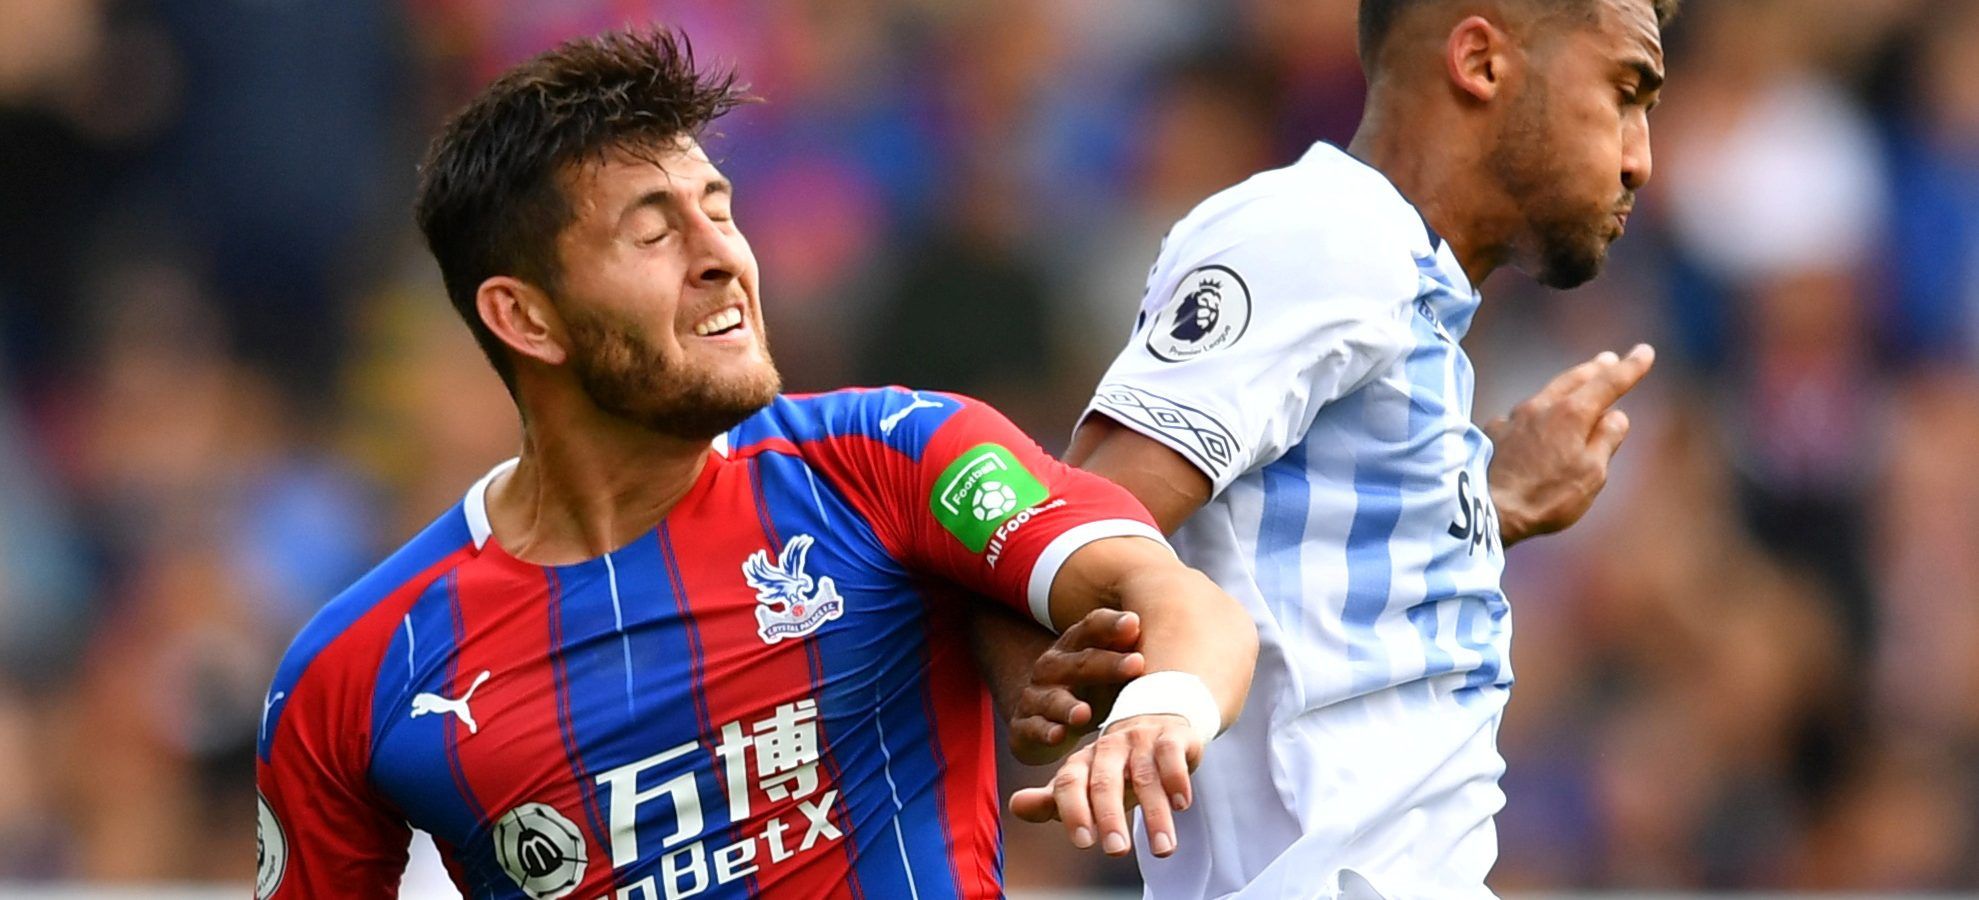 Soccer Football - Premier League - Crystal Palace v Everton - Selhurst Park, London, Britain - August 10, 2019  Crystal Palace's Joel Ward in action with Everton's Dominic Calvert-Lewin    REUTERS/Dylan Martinez  EDITORIAL USE ONLY. No use with unauthorized audio, video, data, fixture lists, club/league logos or 